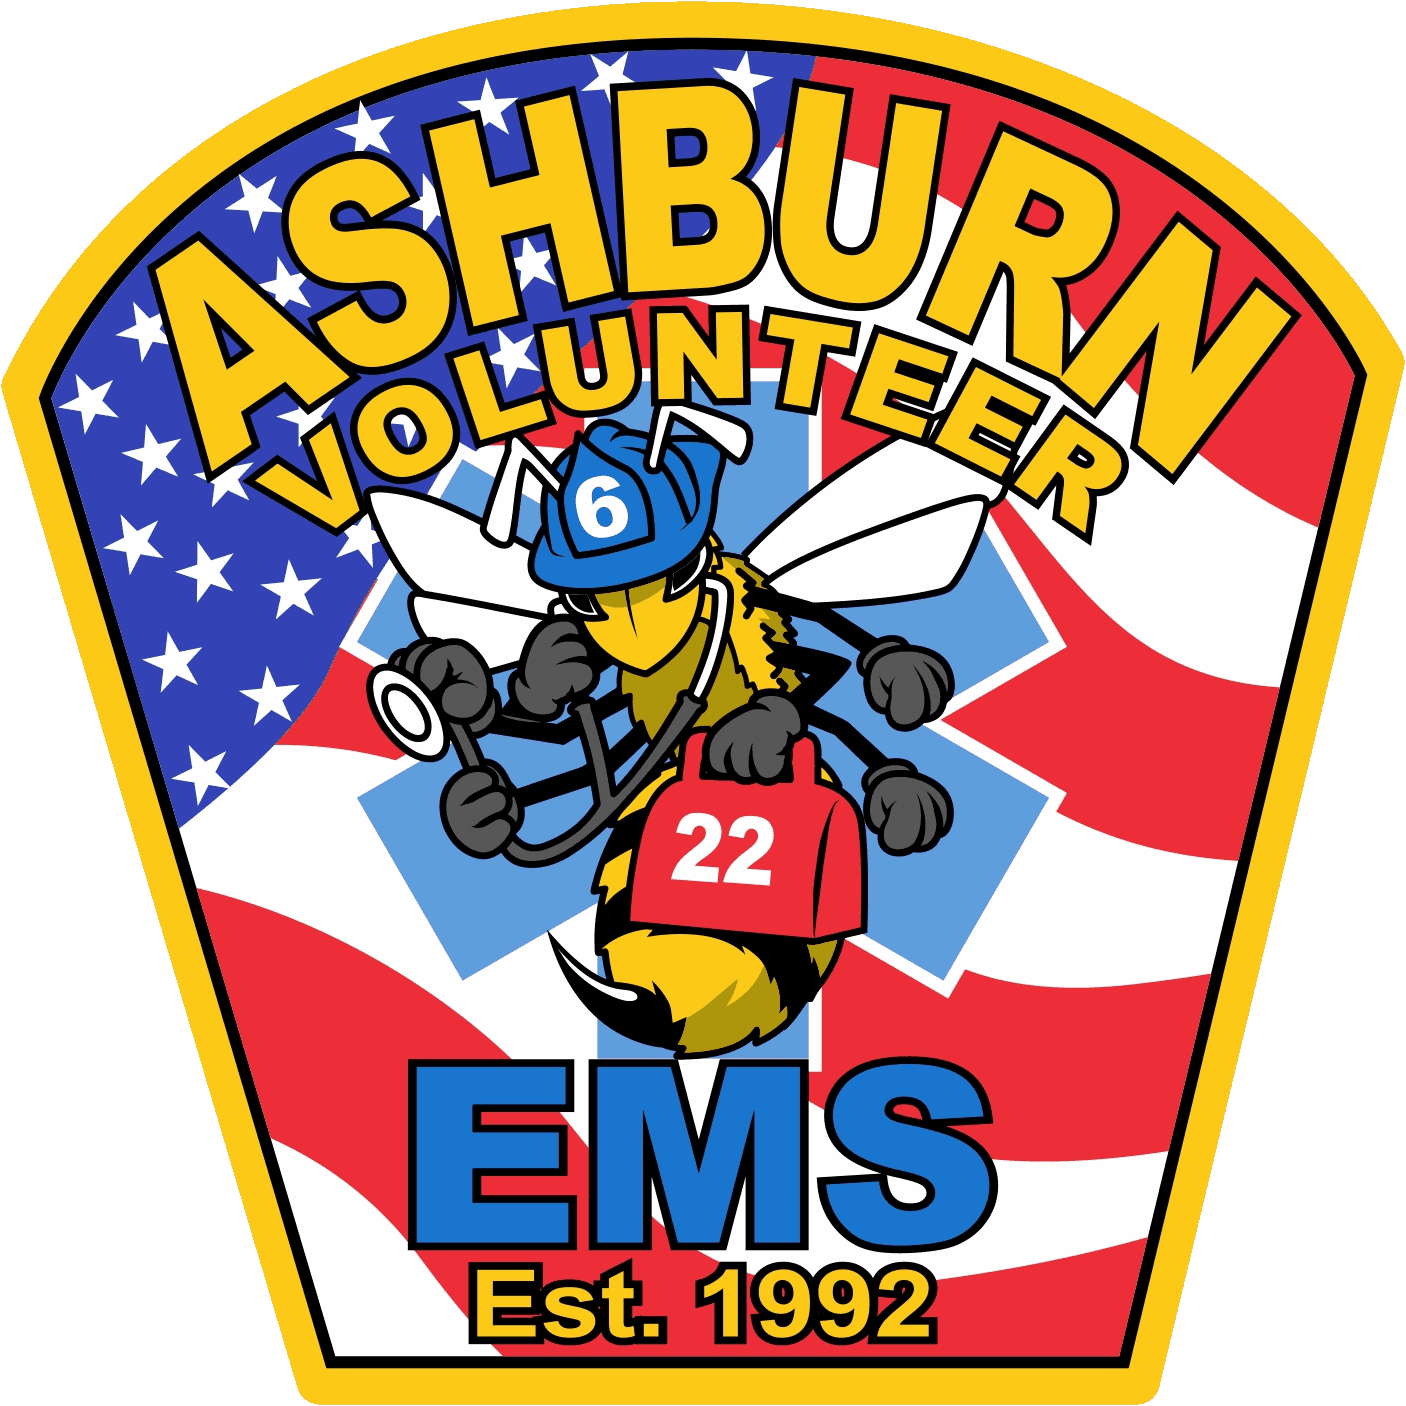 Gallery - Fire Dept Patches Ems (1406x1406)